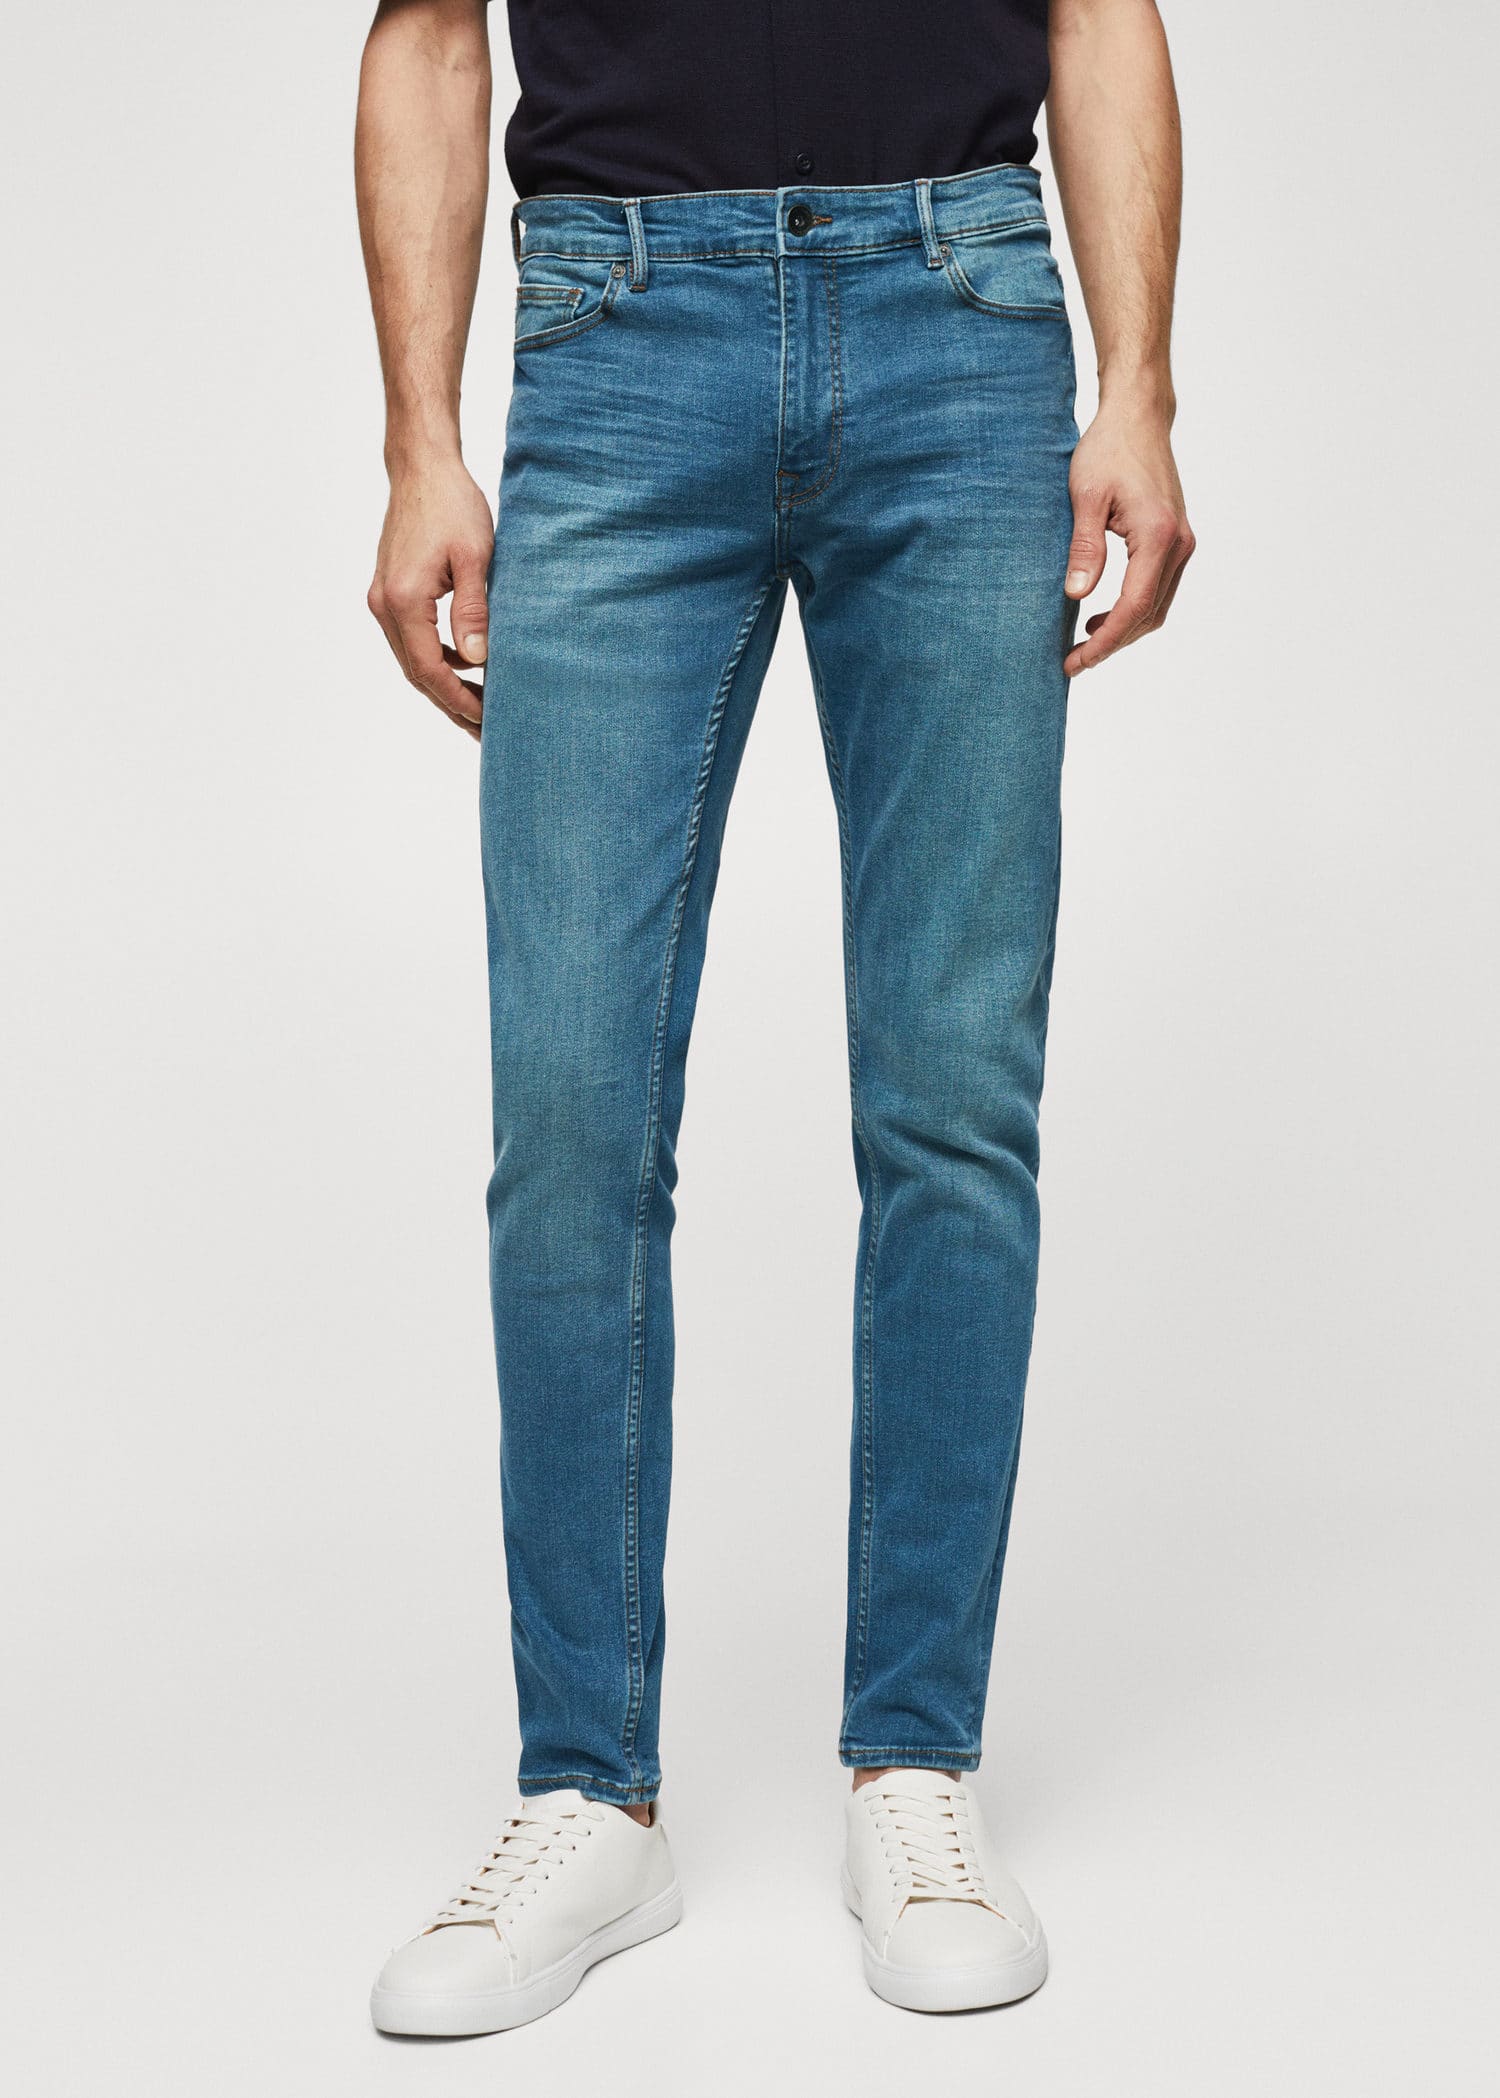 Jeans Jude skinny-fit - Piano medio